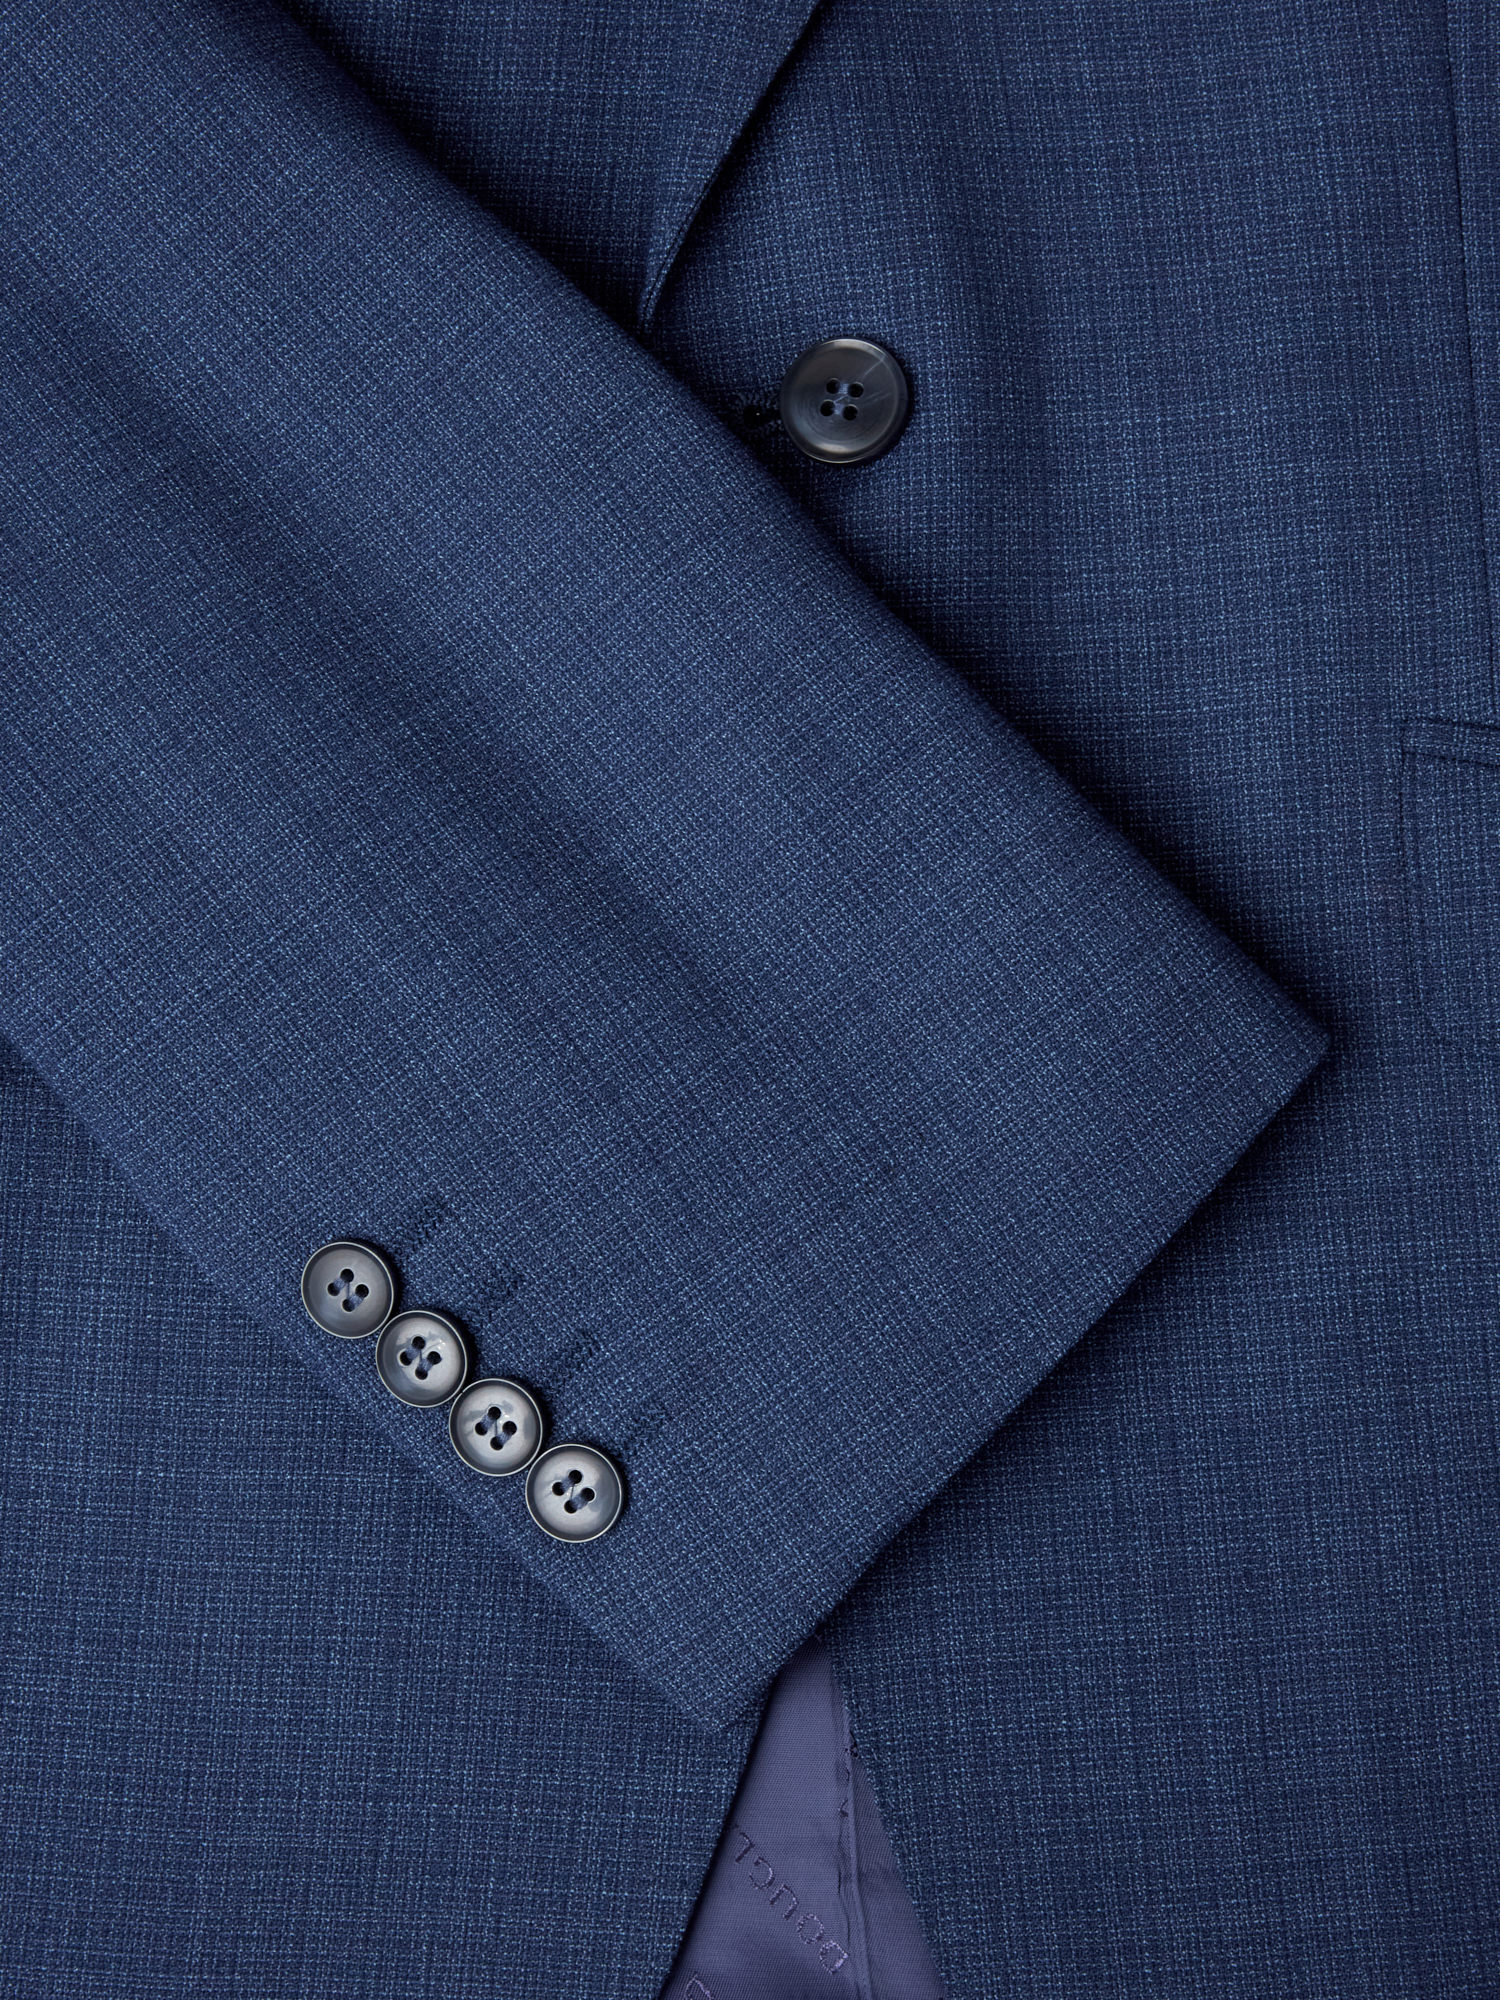 Blue Woven Douglas Textured Suit - Tom Murphy's Formal and Menswear